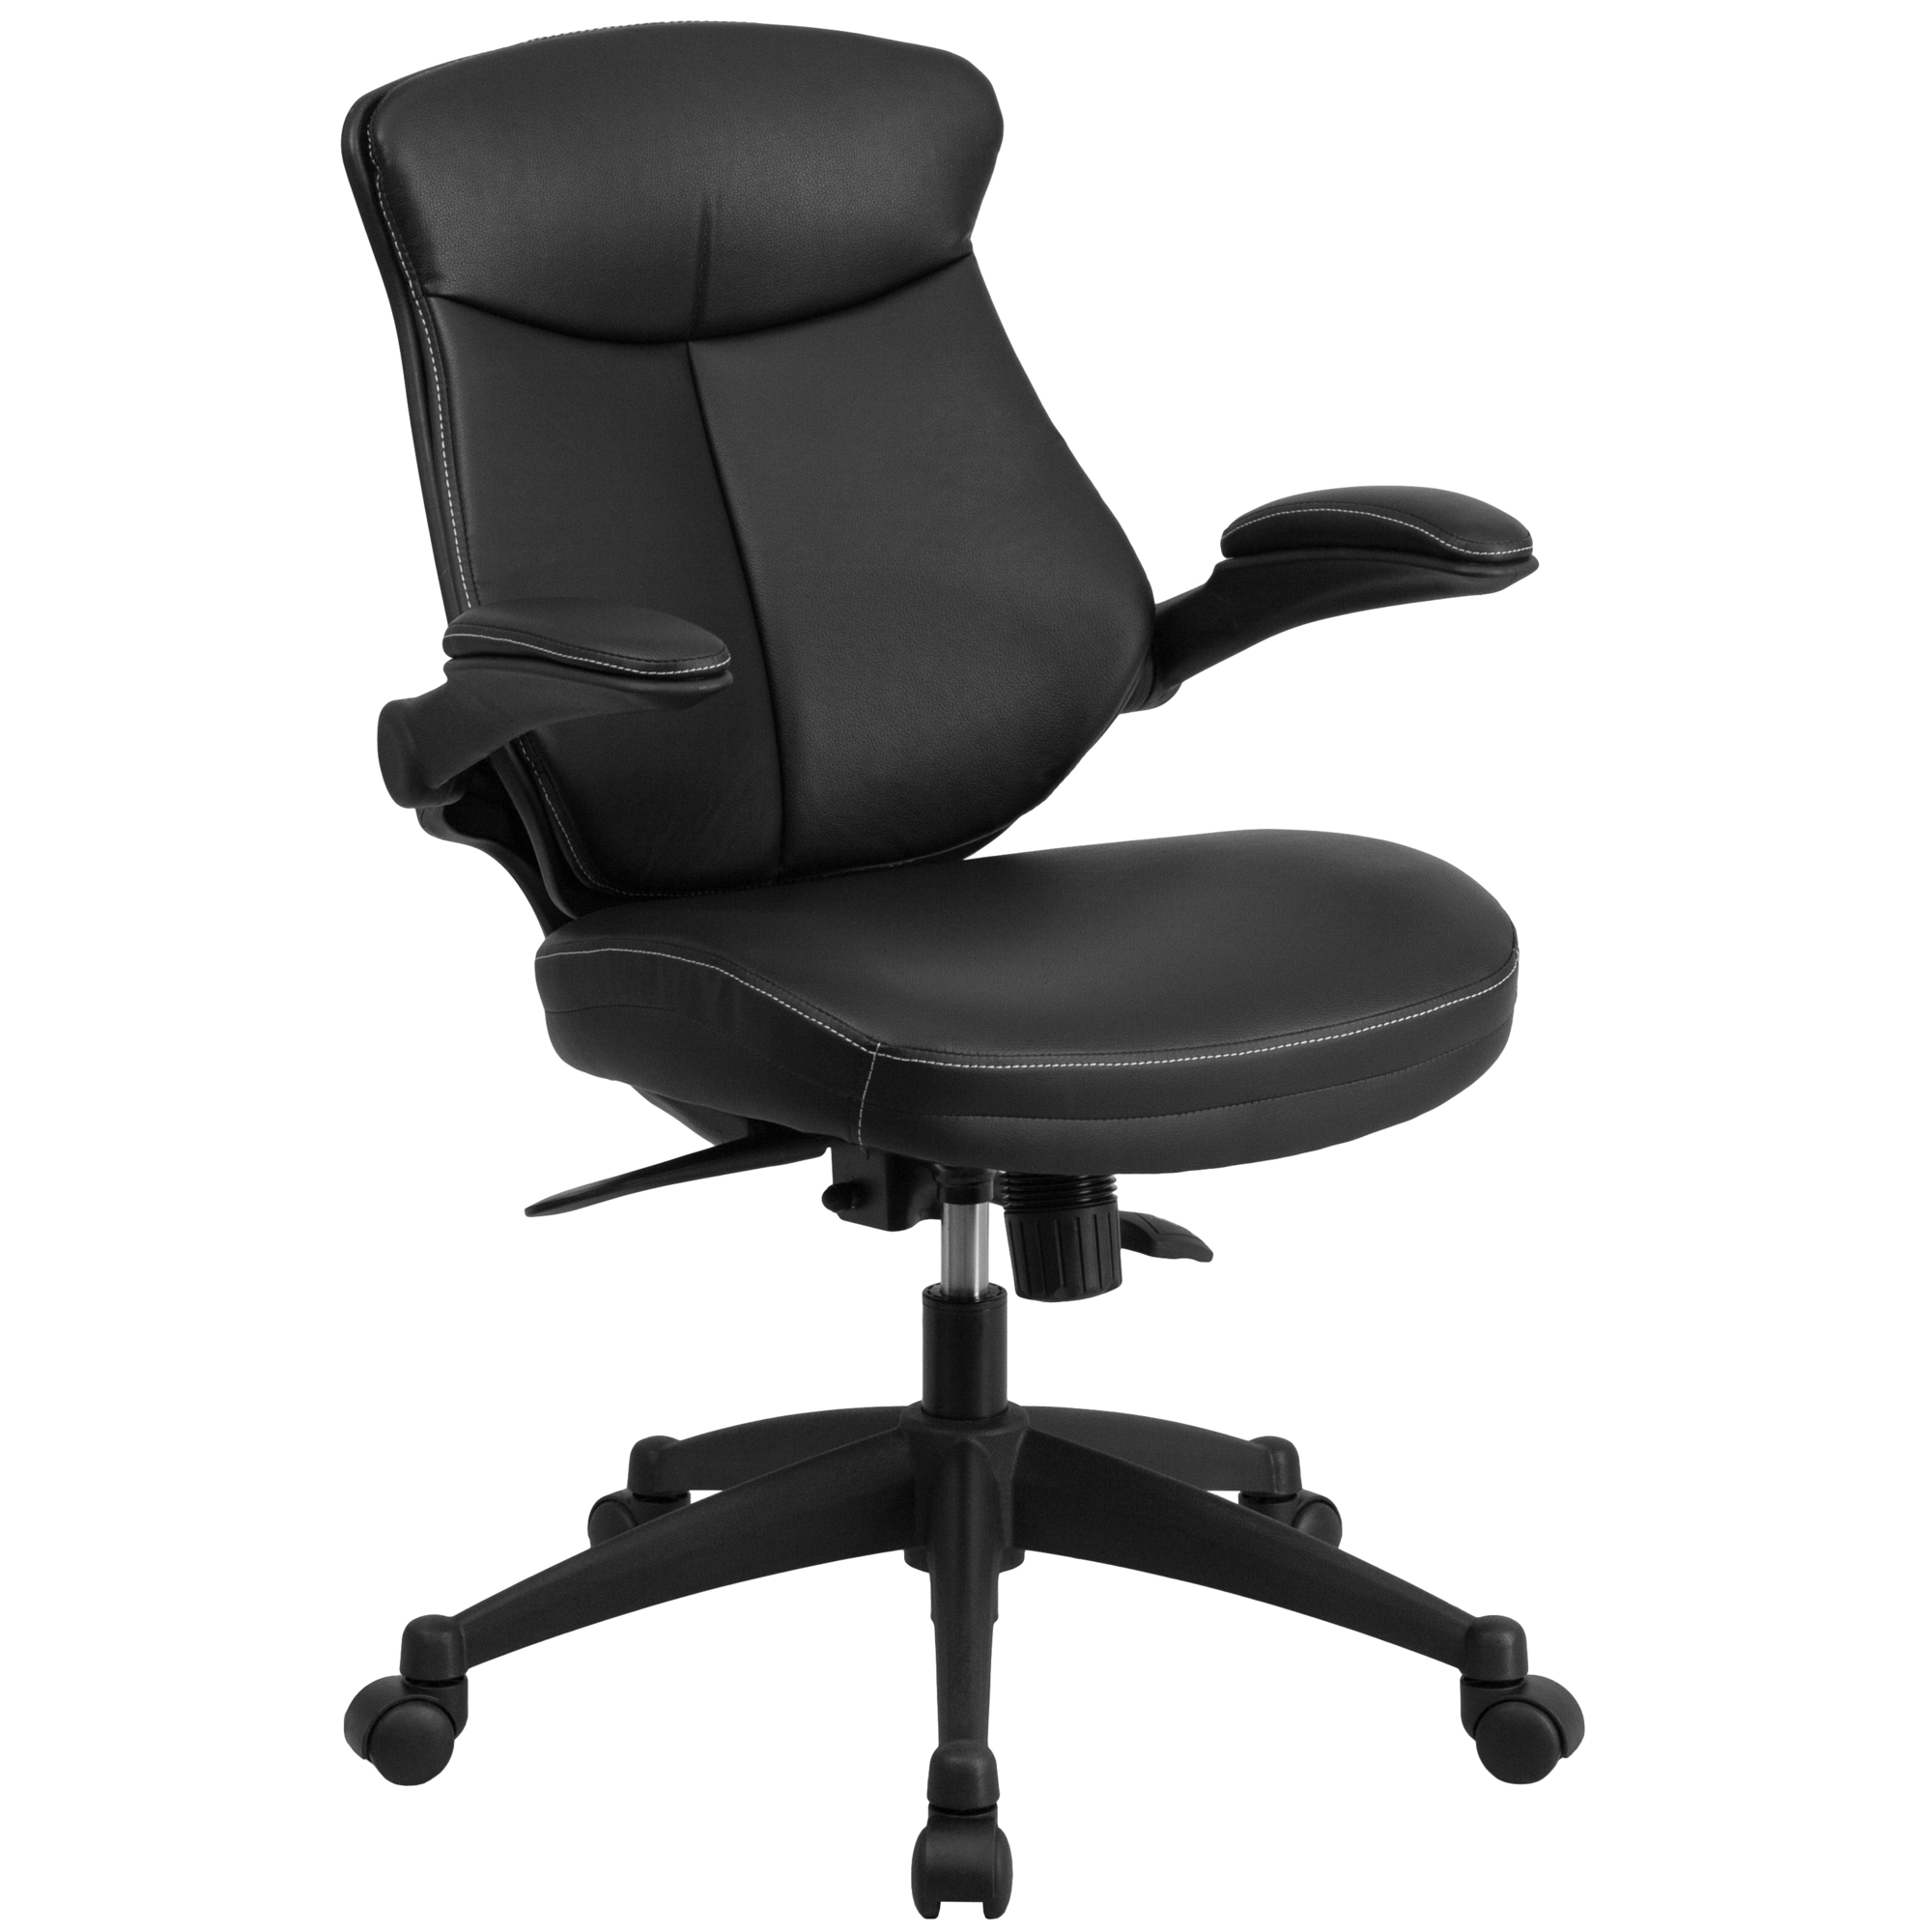 Flash Furniture, Black LeatherSoft Chair with Back Angle Adjustment, Primary Color Black, Included (qty.) 1, Model BLZP804